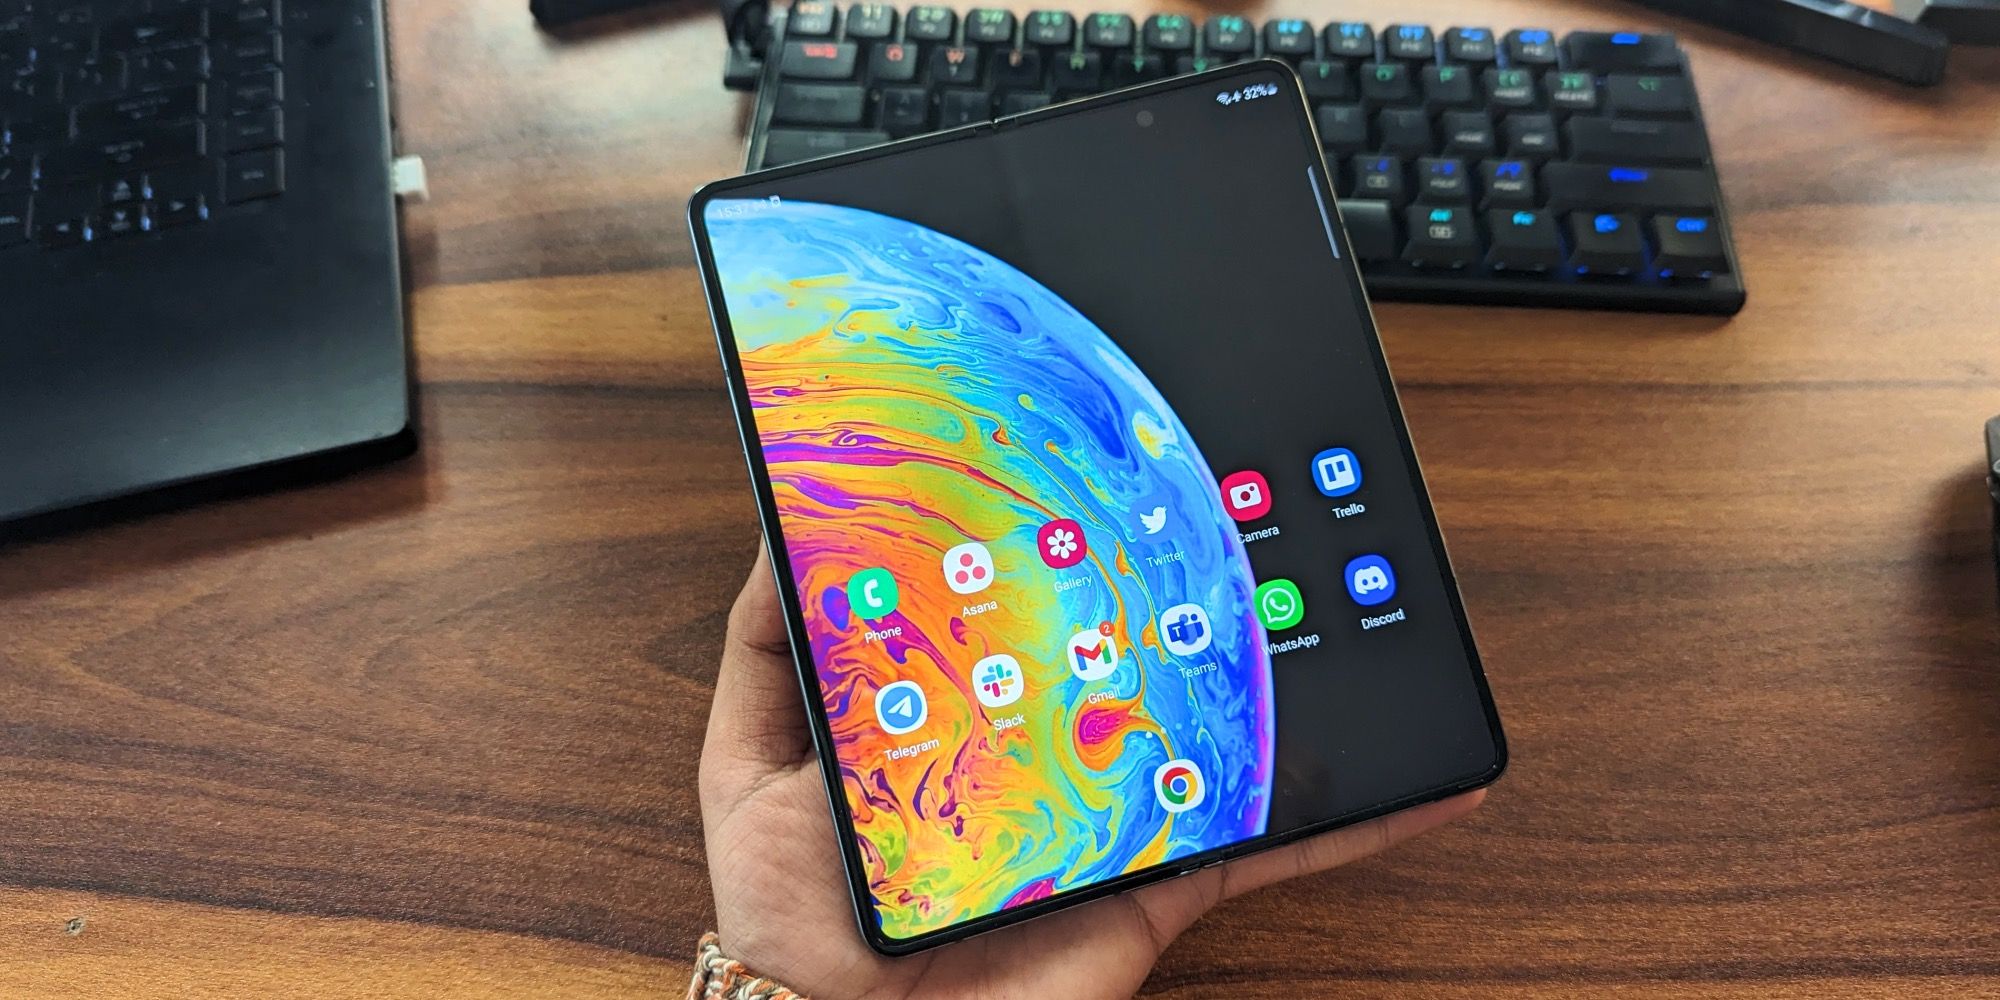 Samsung Galaxy Z Fold 4 in the hands of a user.